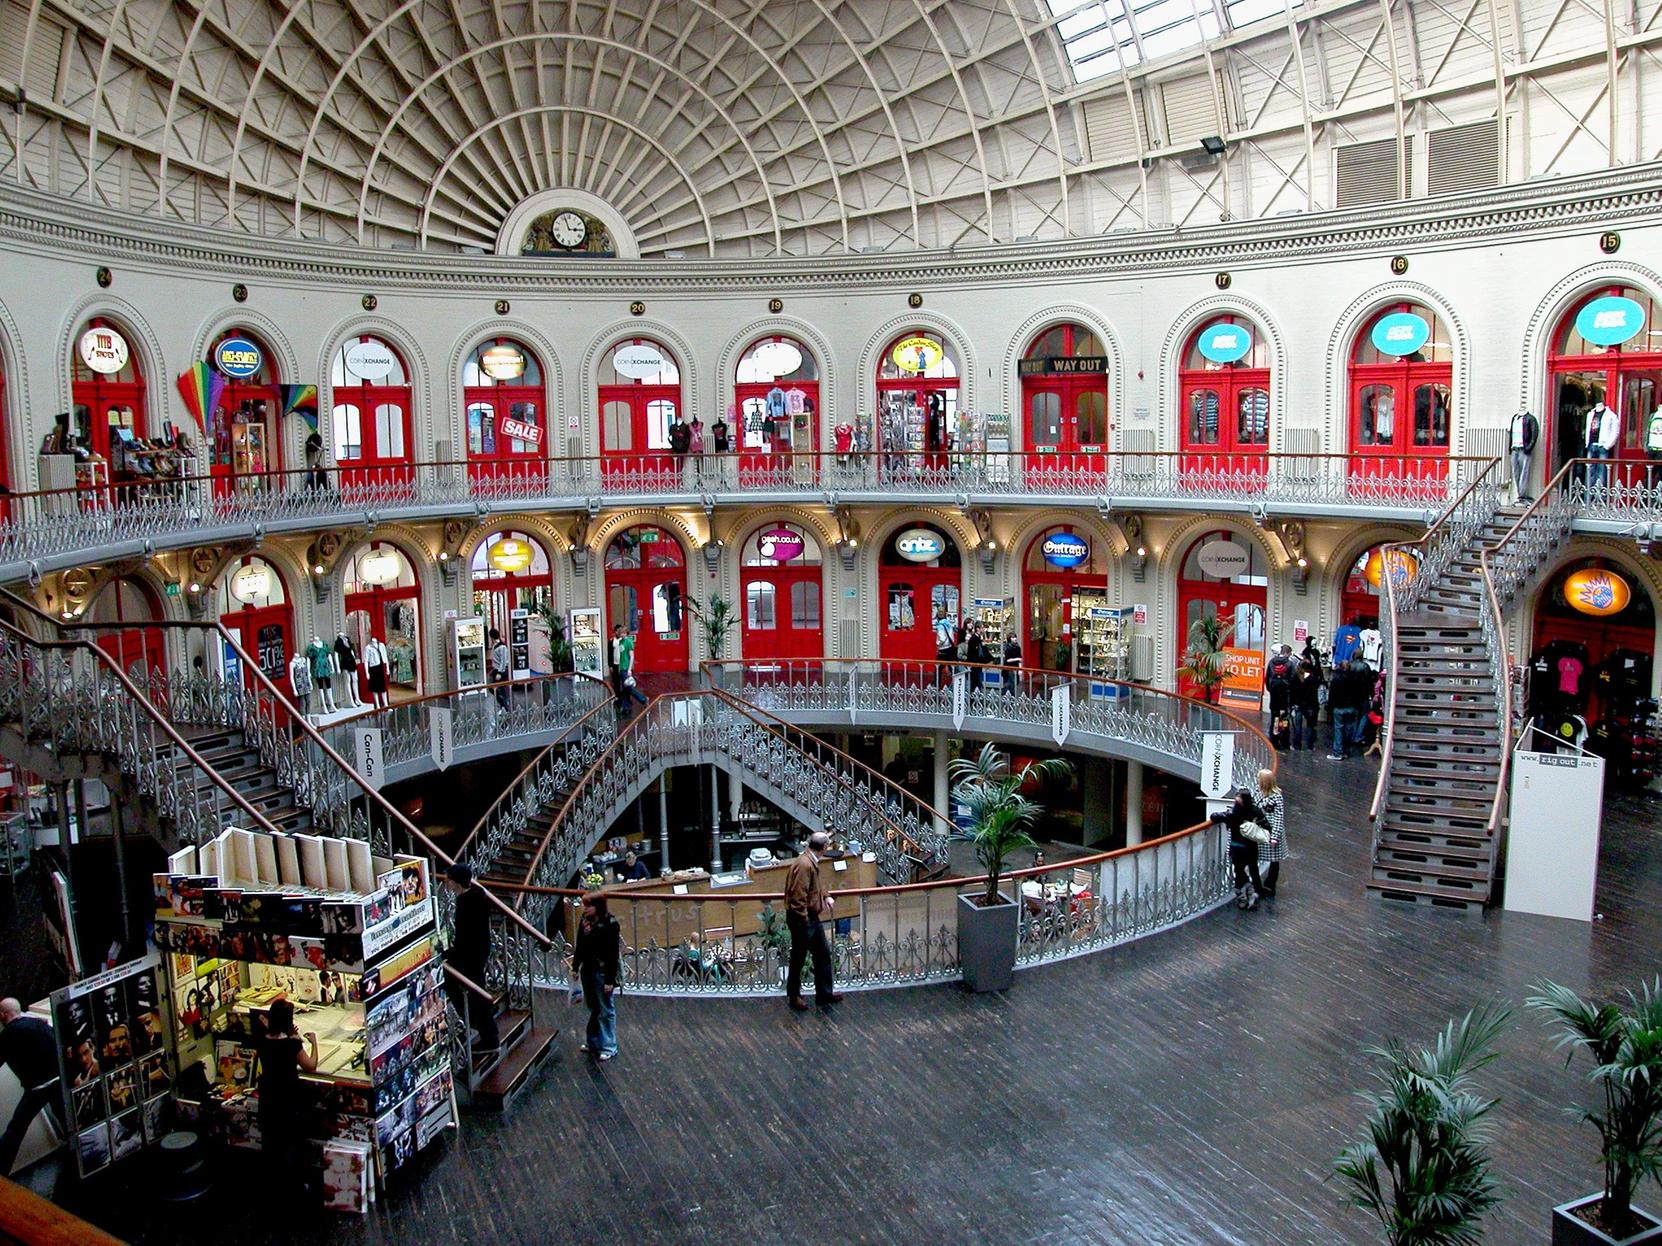 The Corn Exchange was the place to be seen for all us cool kids on a weekend.